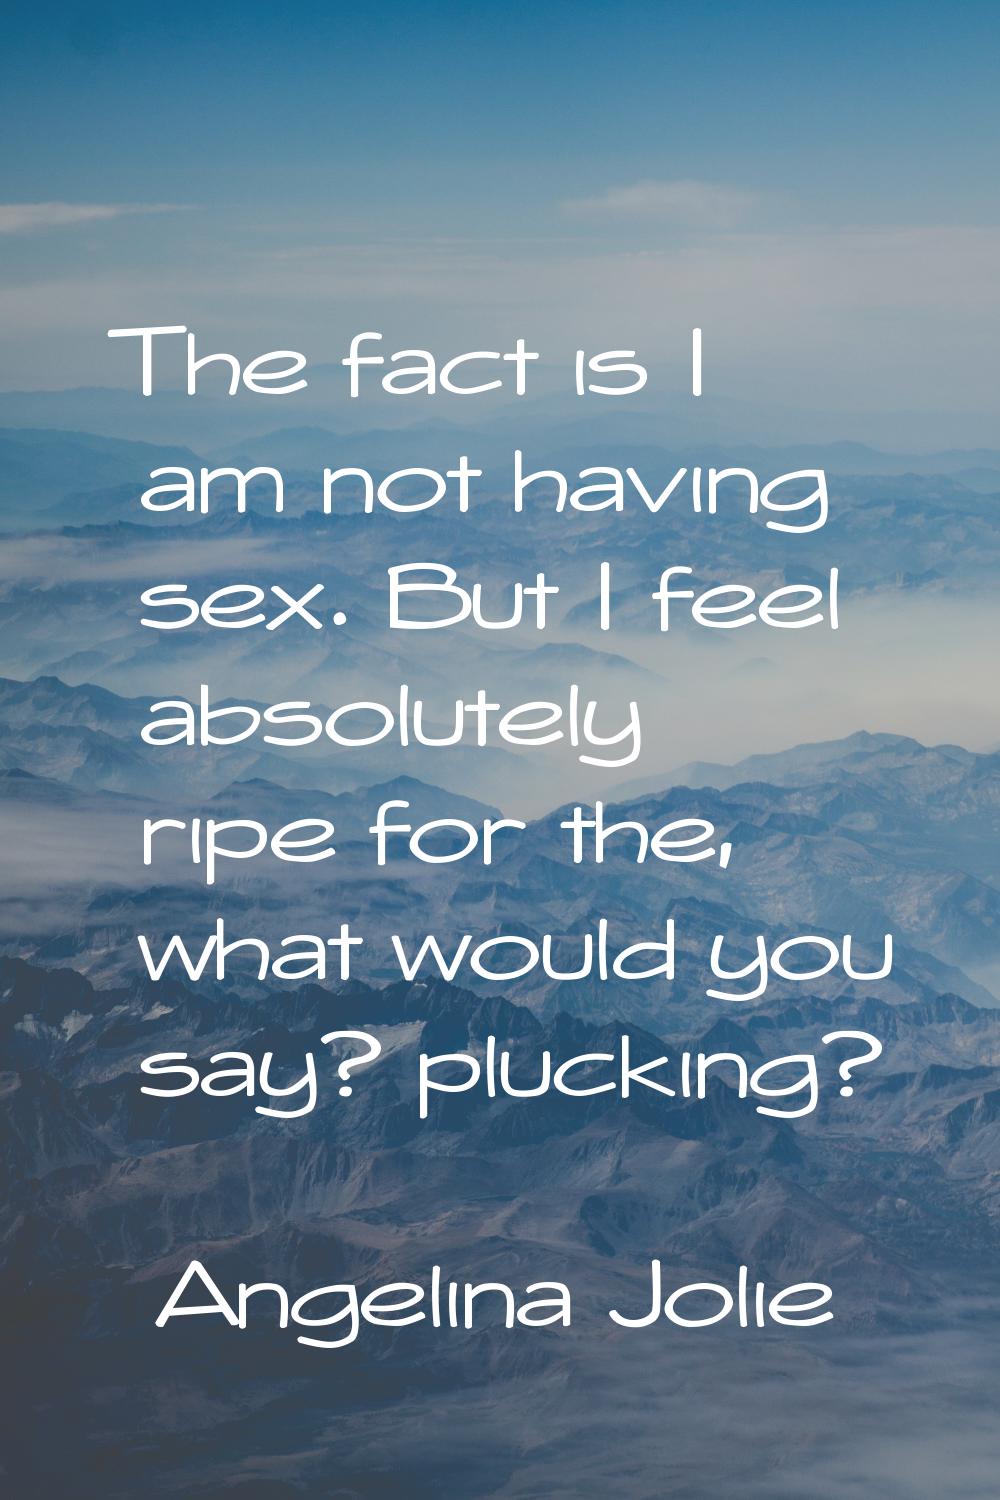 The fact is I am not having sex. But I feel absolutely ripe for the, what would you say? plucking?